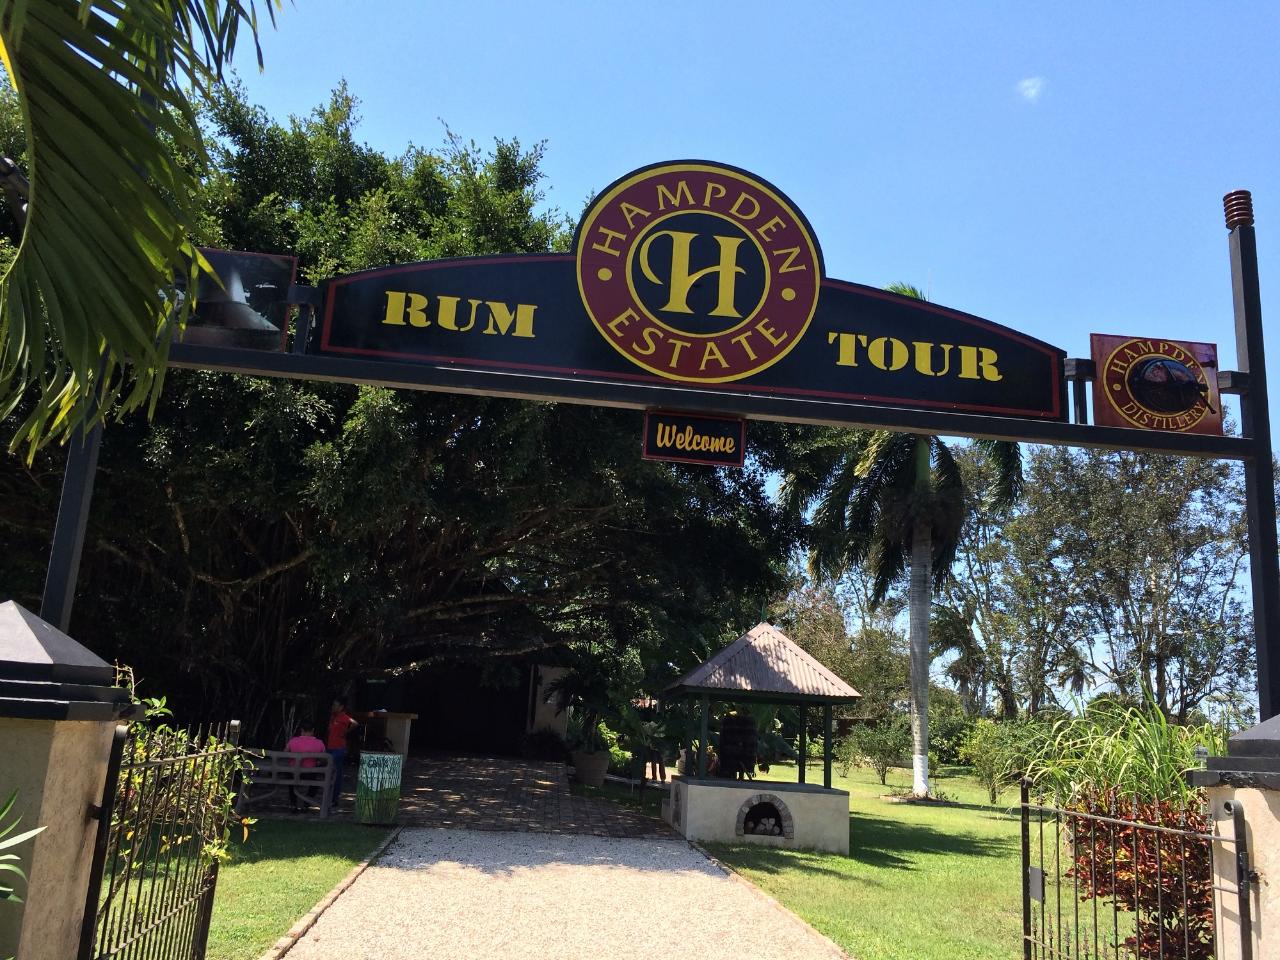 Hampden Estate Rum Tour and Lunch from Runaway Bay